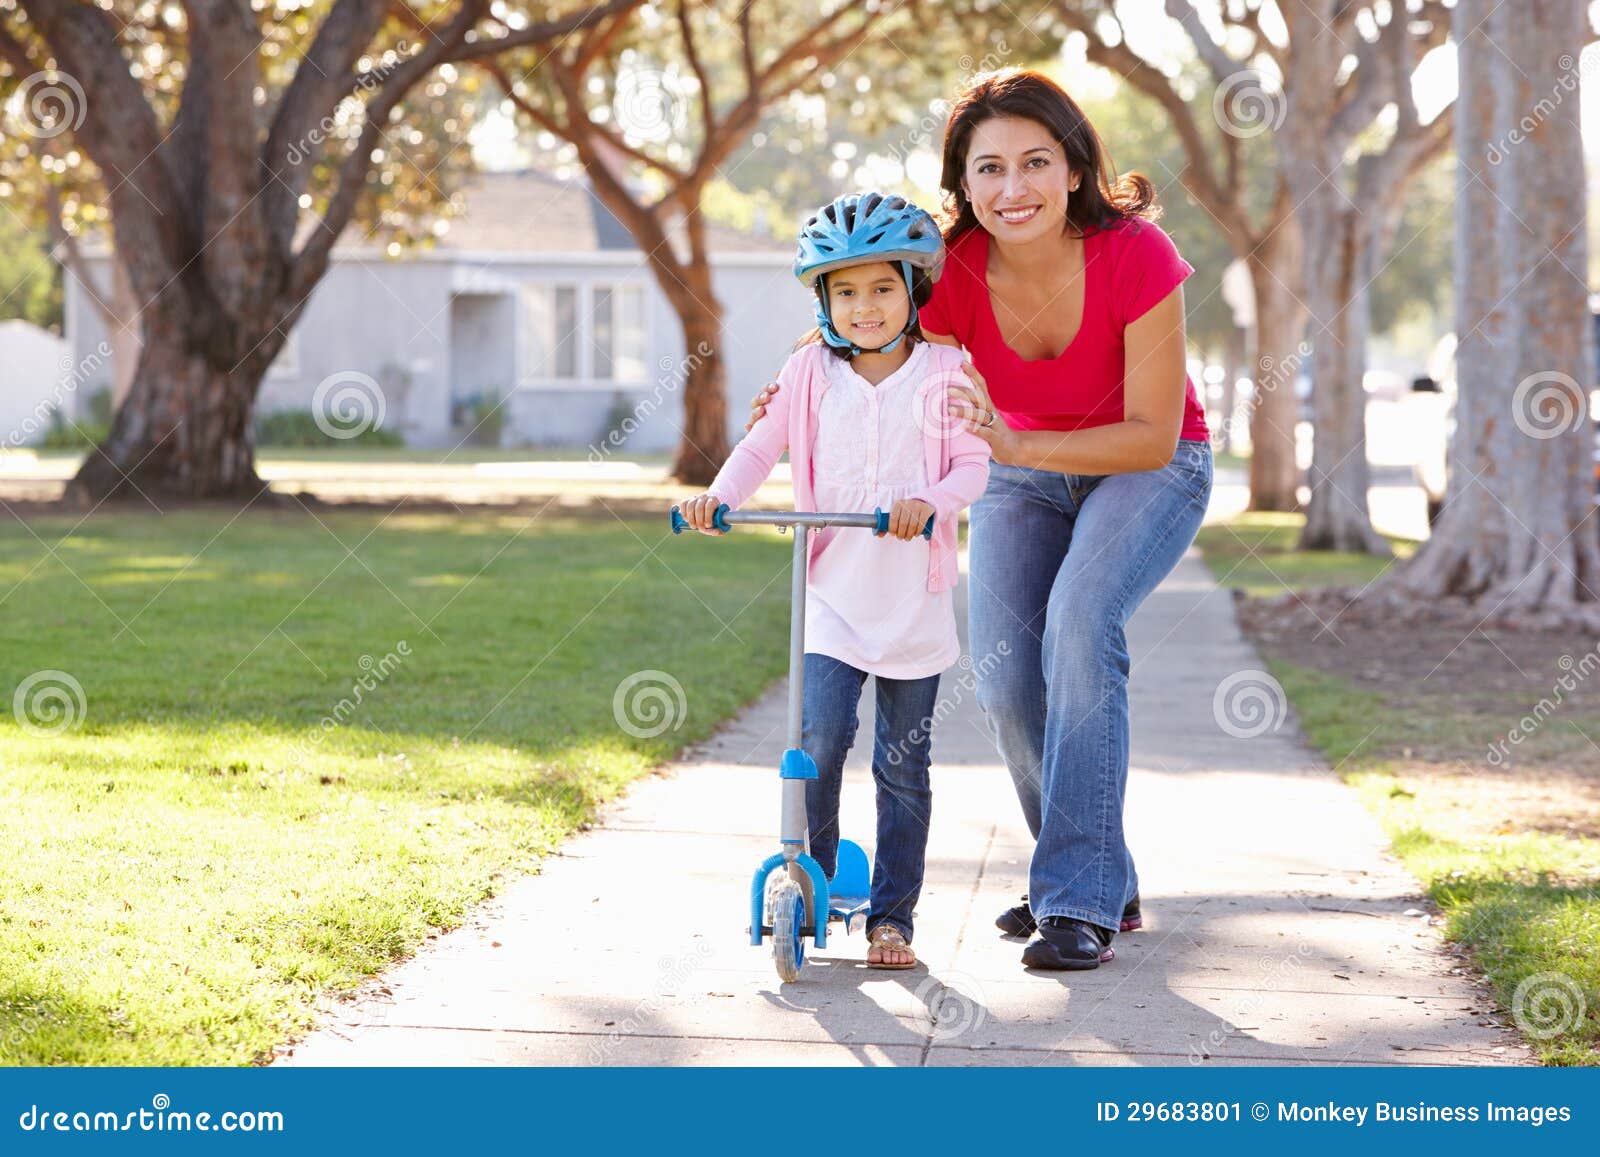 Mother Teaching Daughter To Ride Scooter Stock Image Image 29683801